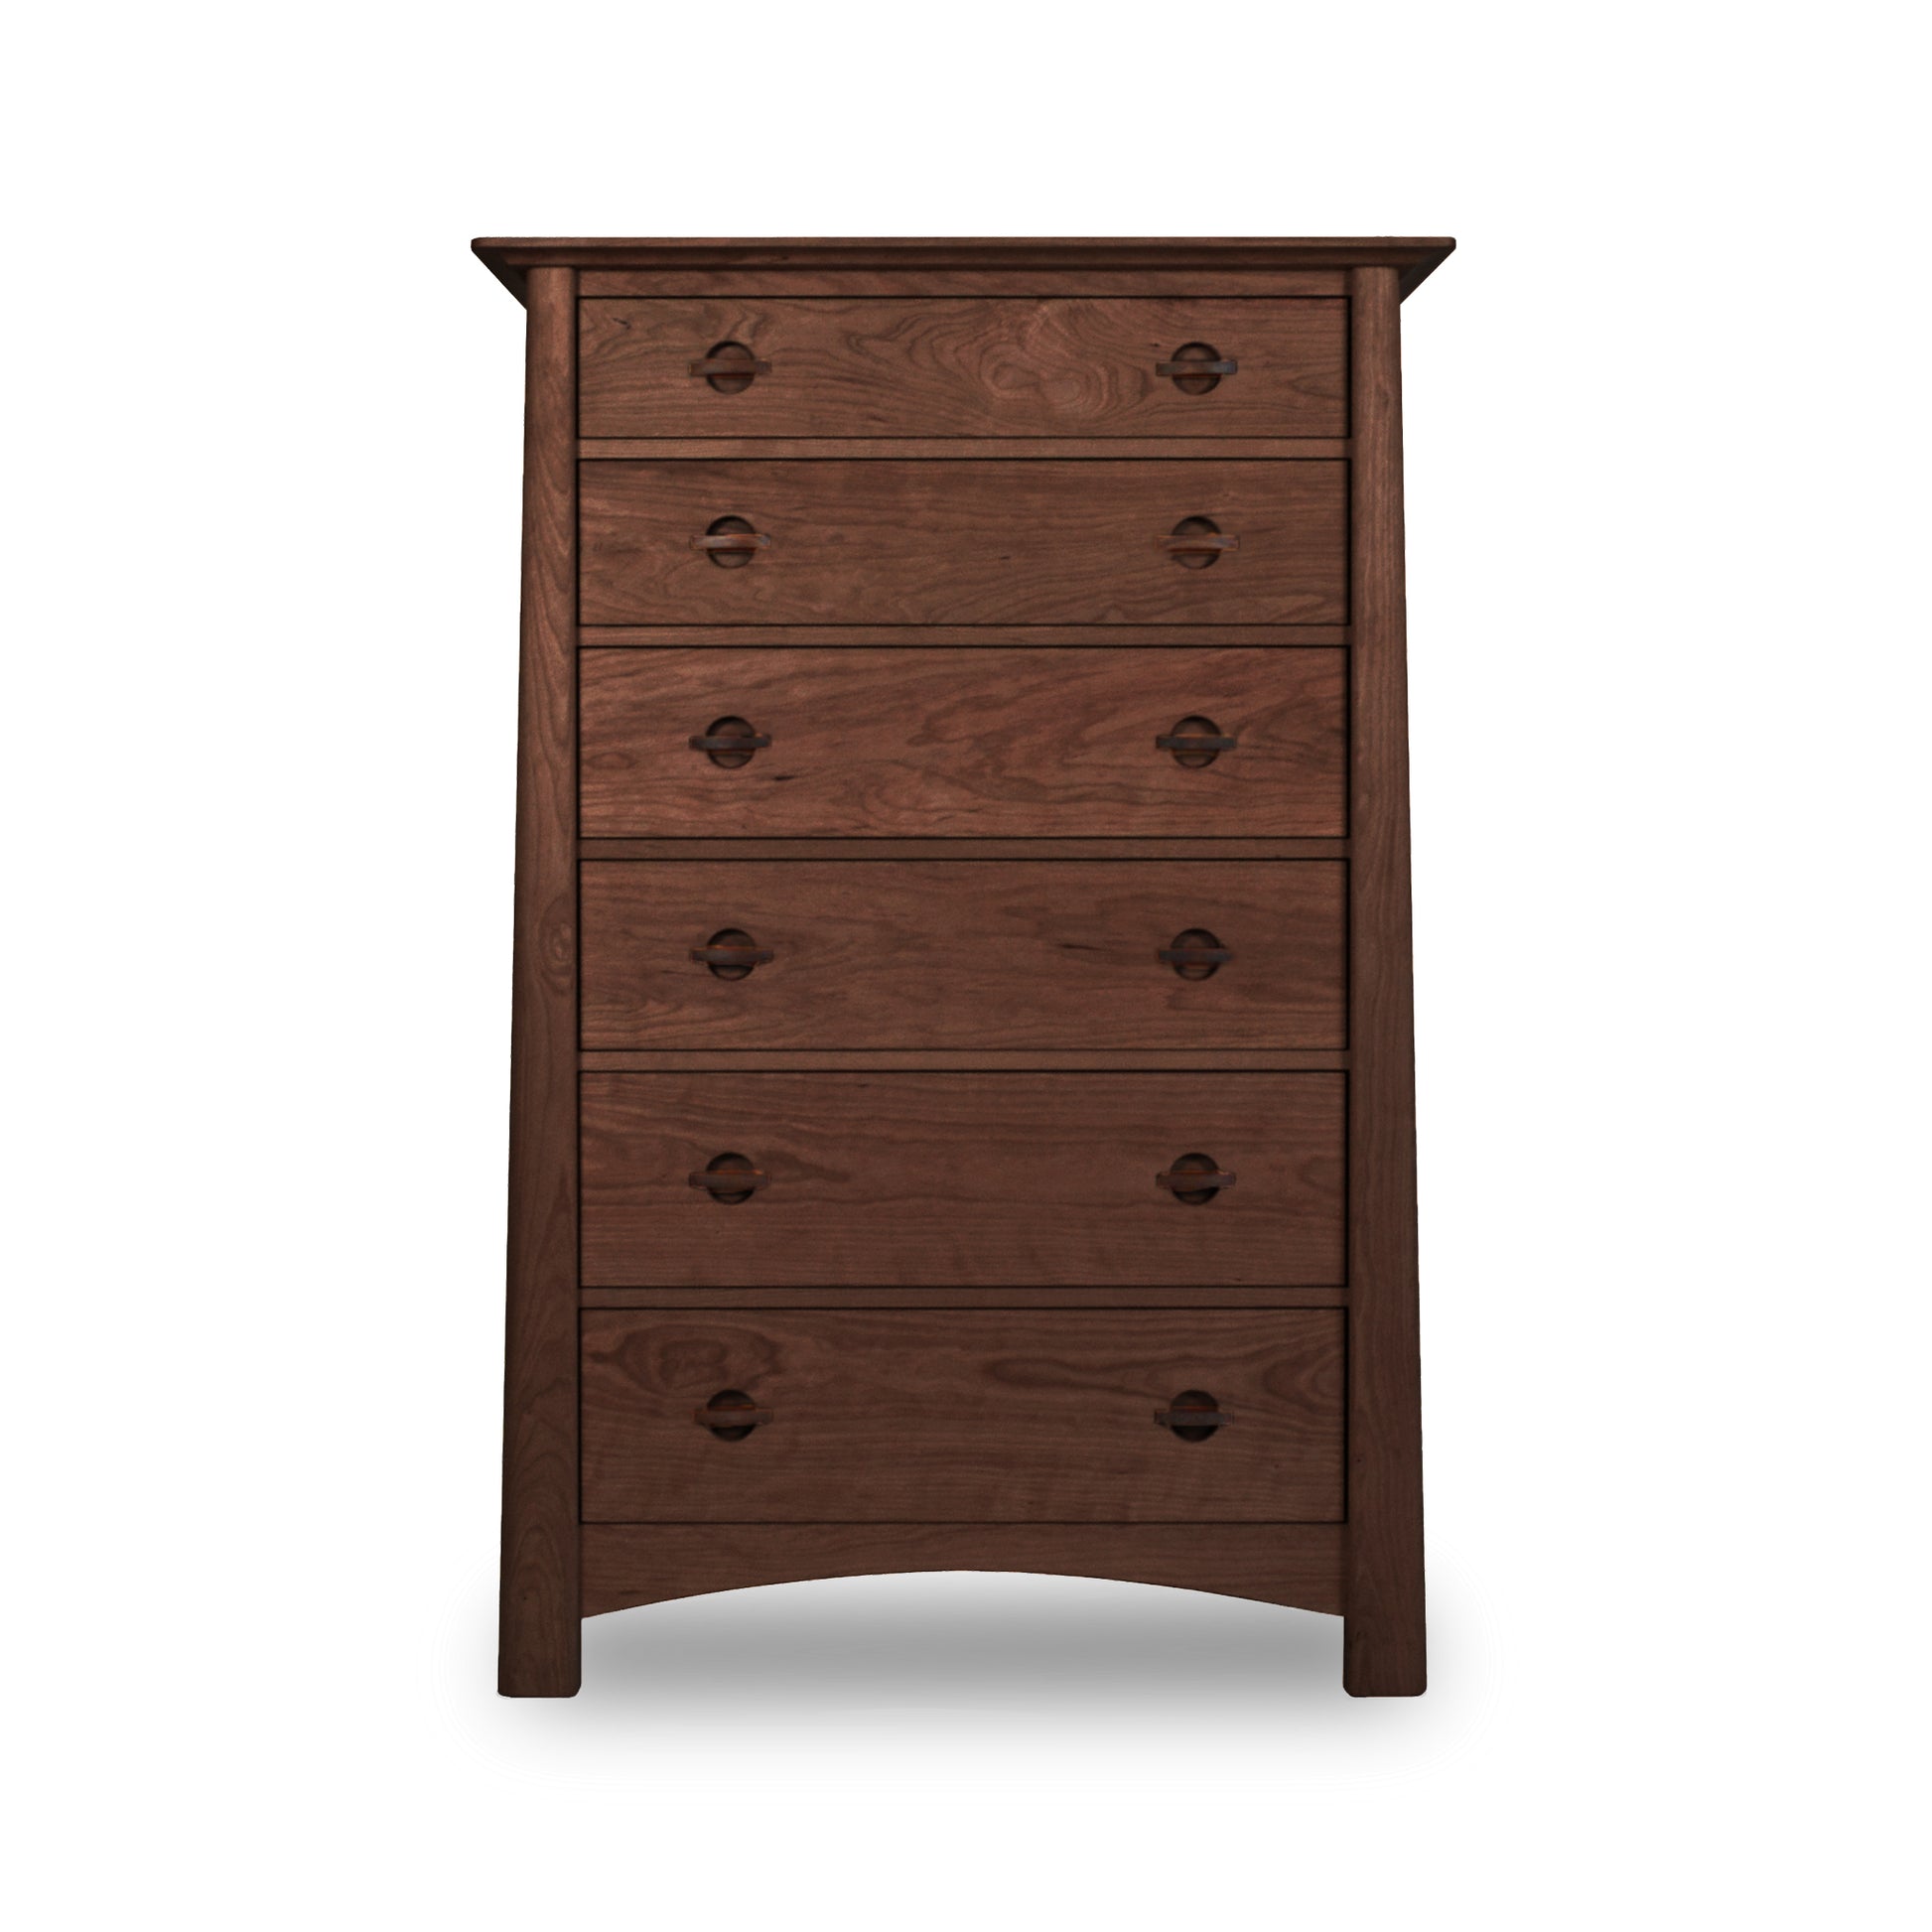 A beautiful Cherry Moon 6-Drawer Chest by Maple Corner Woodworks is shown on a white background.